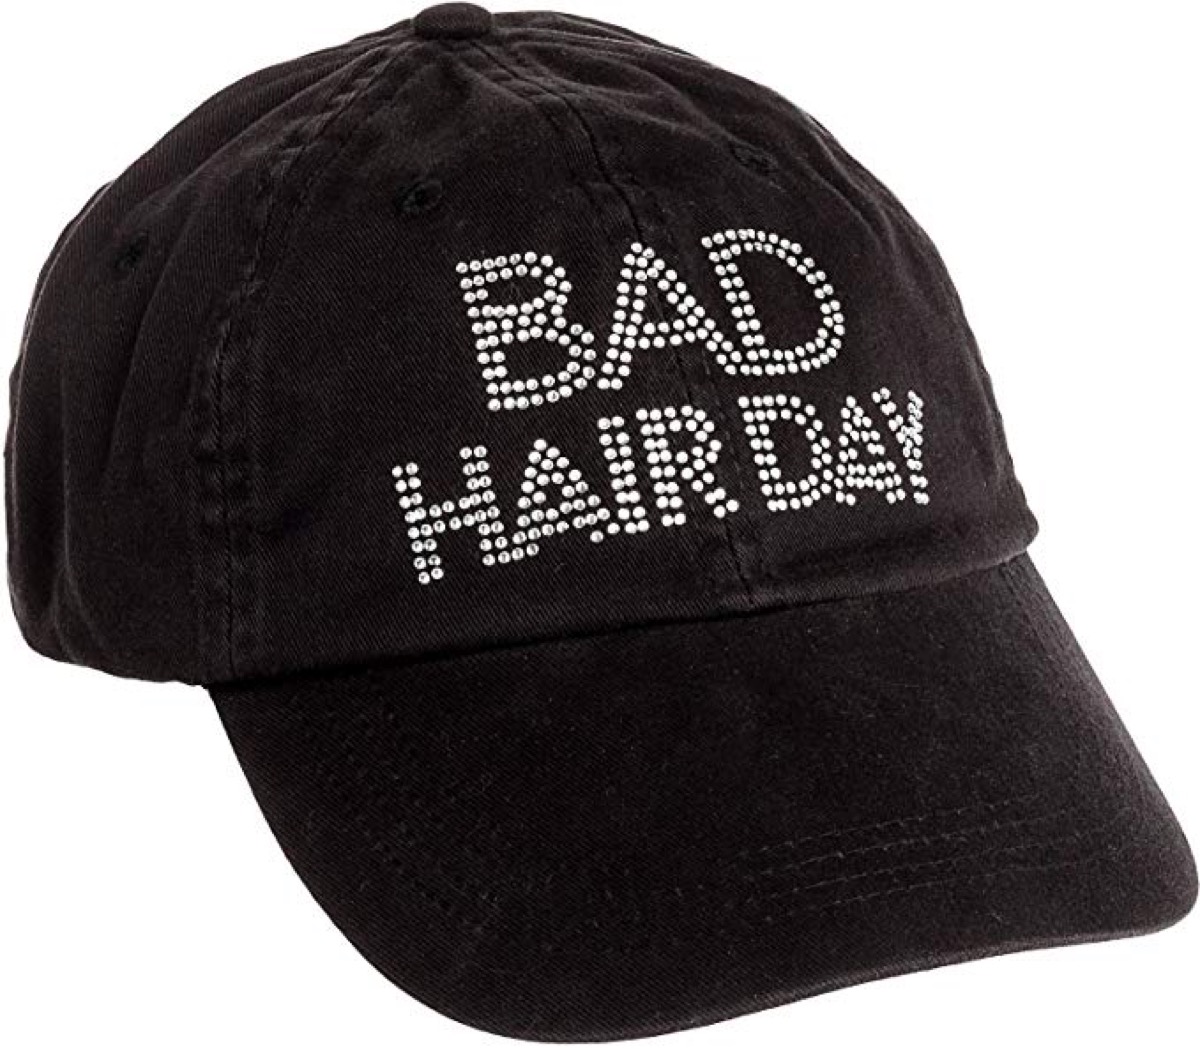 hat with rhinestones that say bad hair day